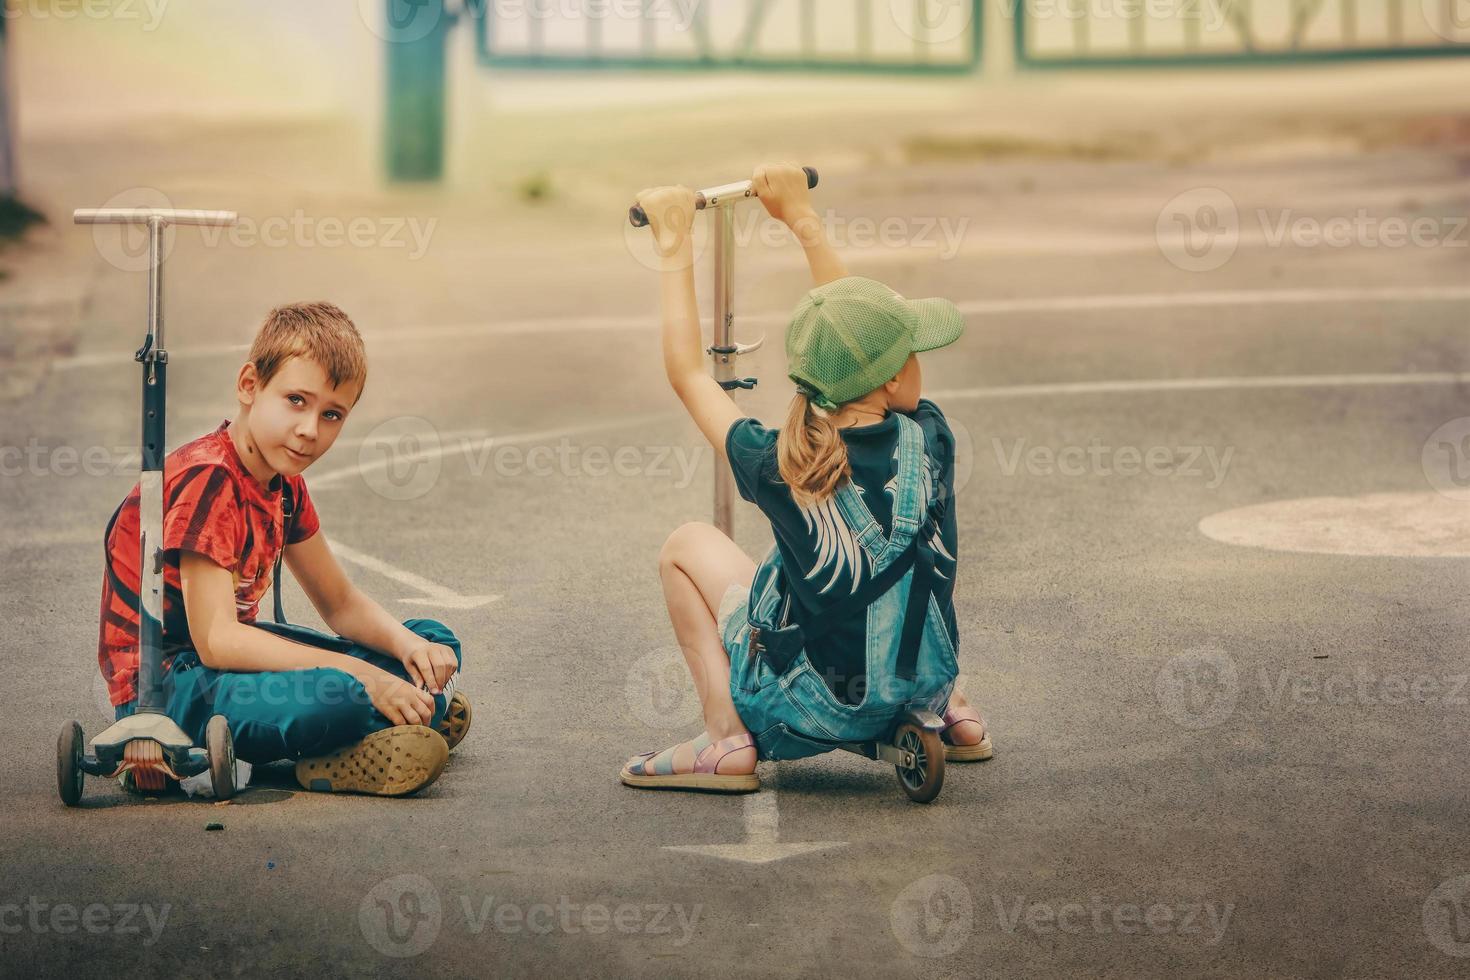 Krichev, Mogilev region, Belarus, 2022 - a girl and a boy are sitting on scooters having a rest playing enough photo